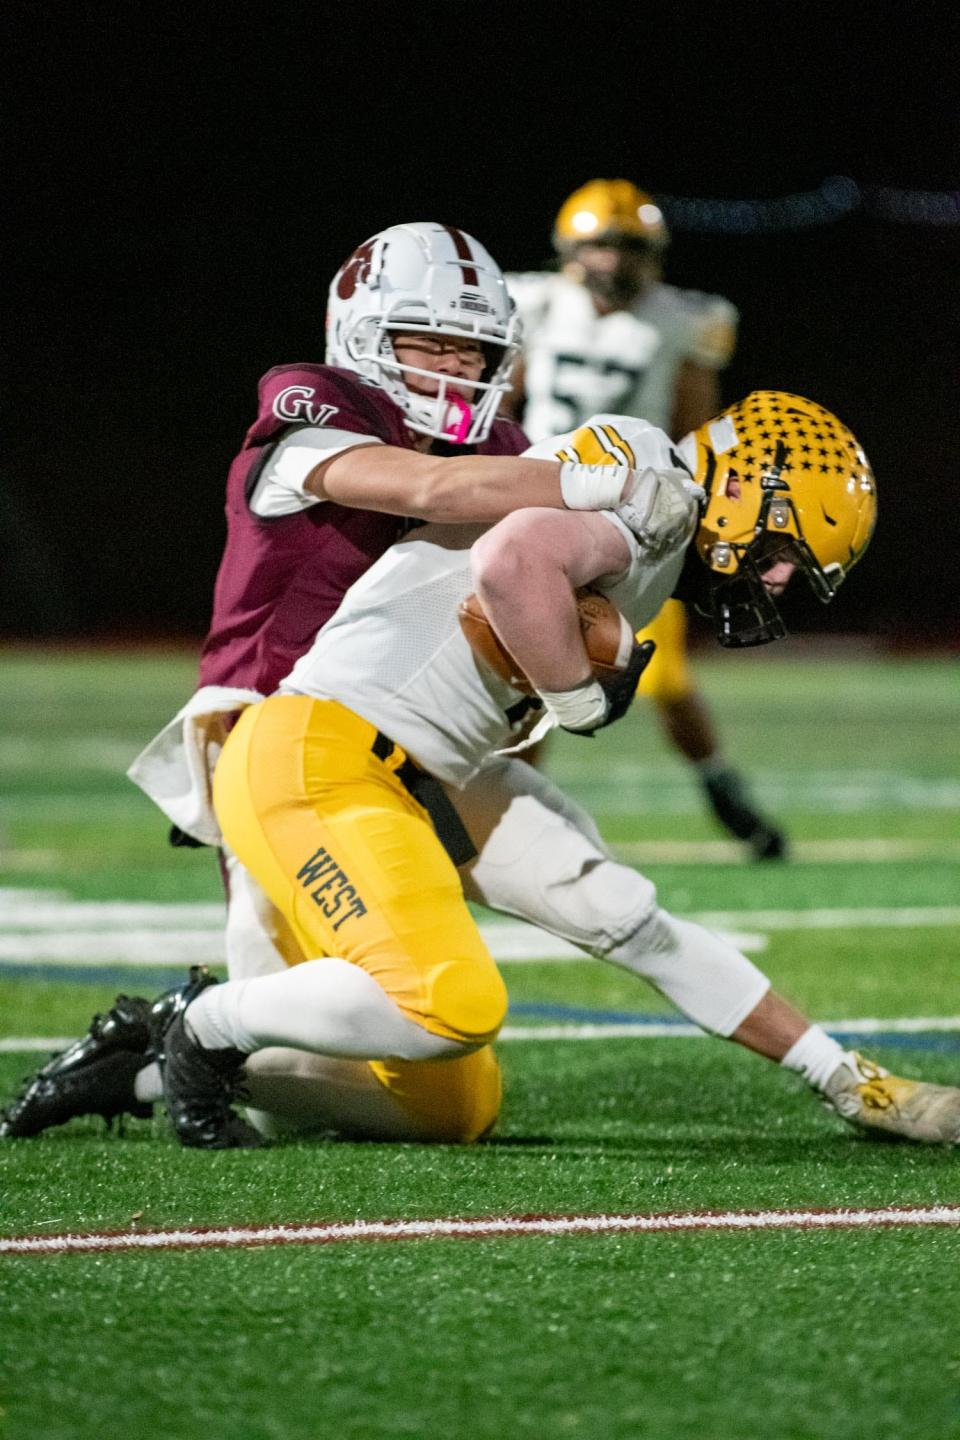 Central Bucks West tight end Jack Williams is tackled by Garnet Valley defensive back Kai Lopez in the PIAA District One Class 6A football championship game at Moe DeFrank Stadium in Collegeville on Friday, November 25, 2022. The Jaguars defeated the Bucks 35-7 for the district title.